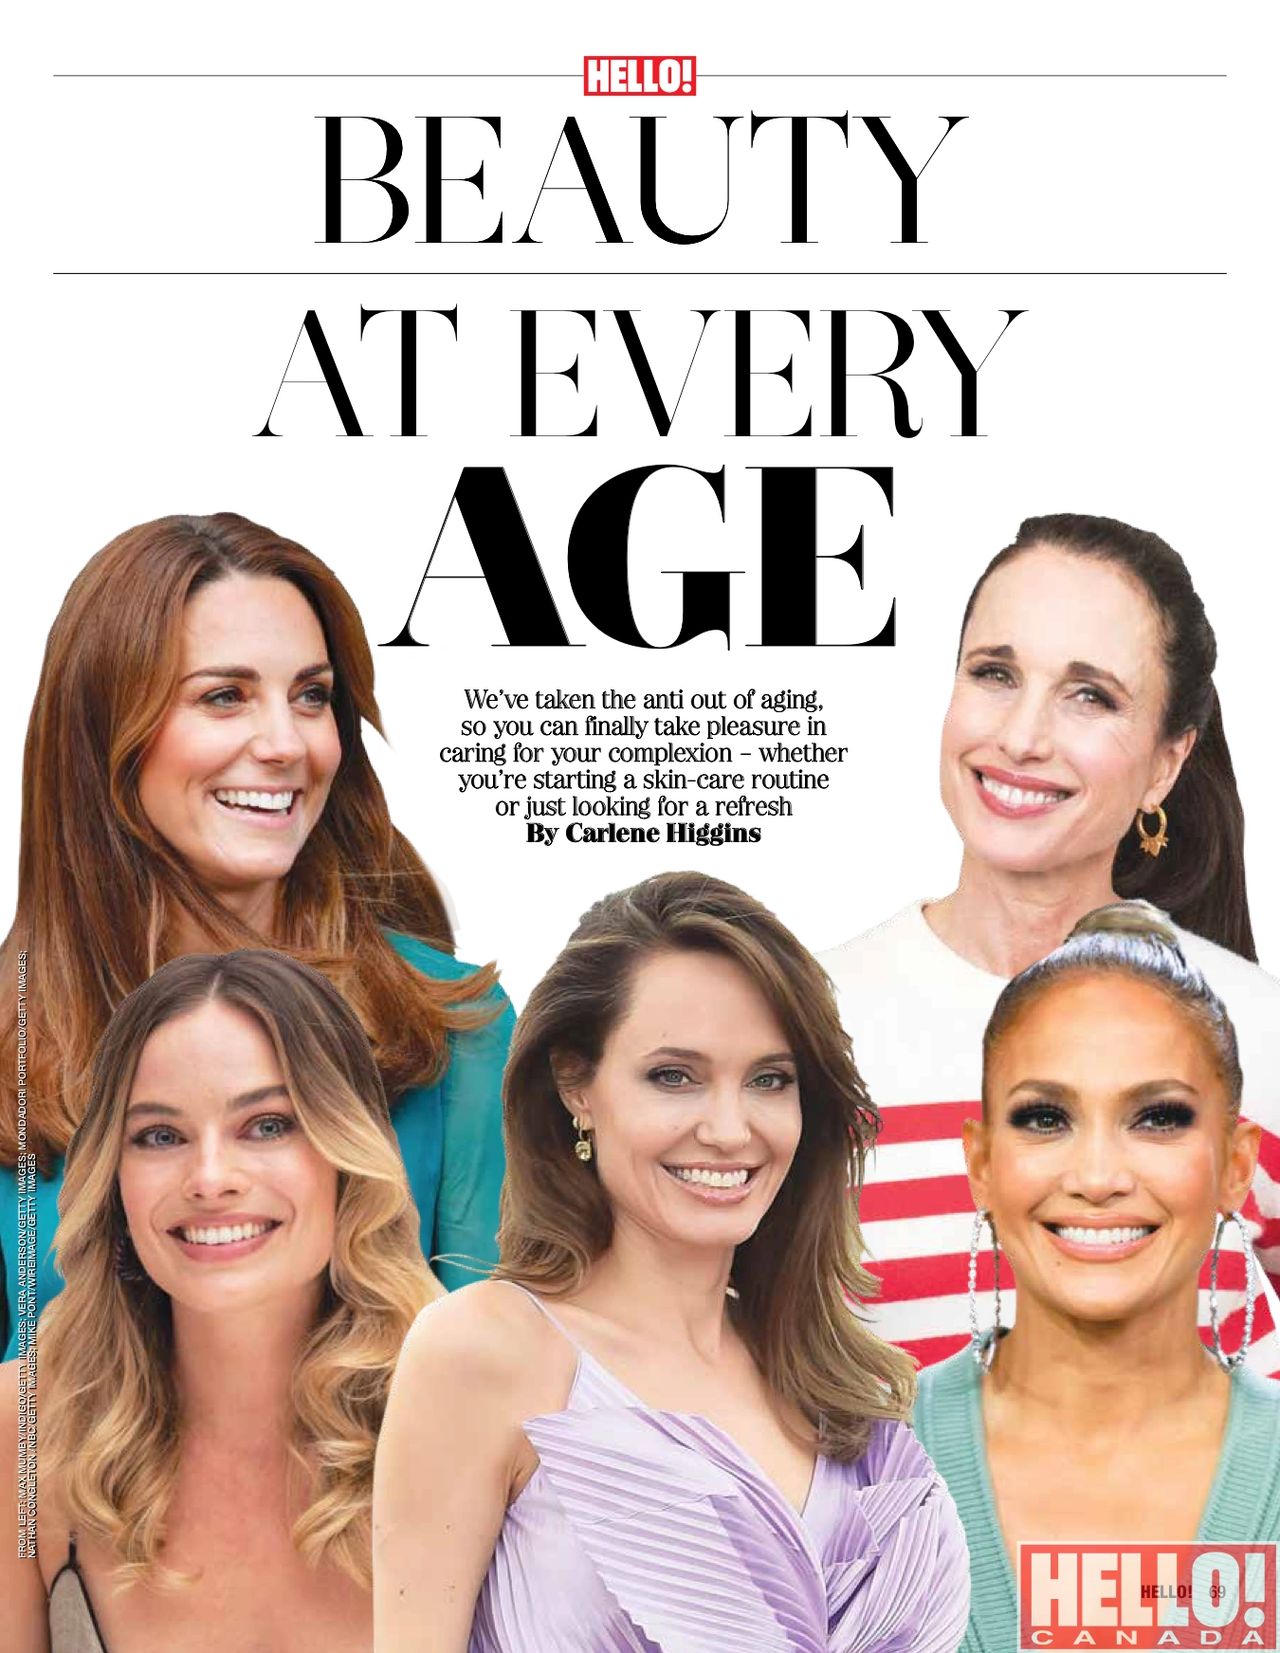 Dr. Sandra Lee (@drpimplepopper) and Dr. Michael Roskies discuss the aging changes to the face by the decade in this article by Hello! Magazine.